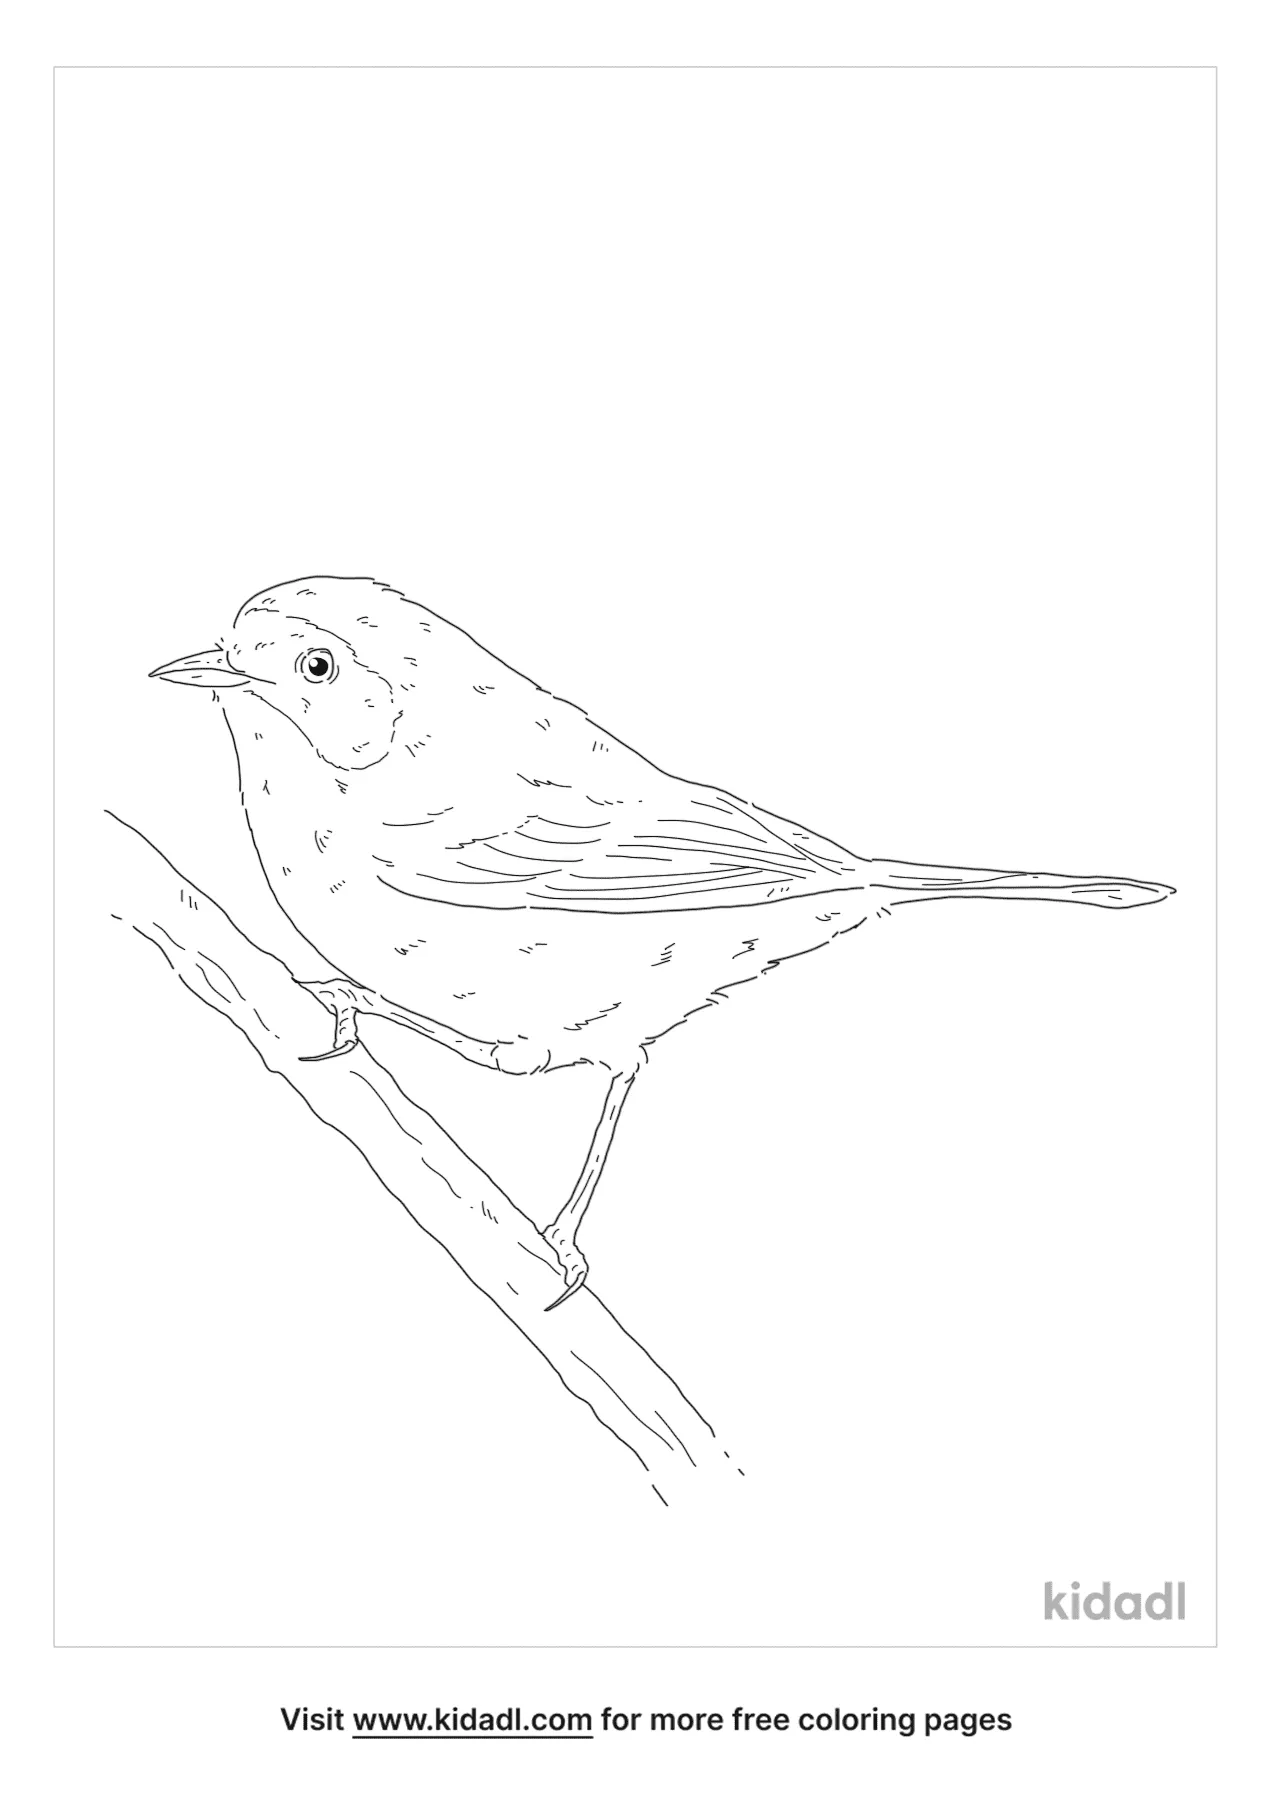 Common Yellowthroat Coloring Page | Free Birds Coloring Page | Kidadl